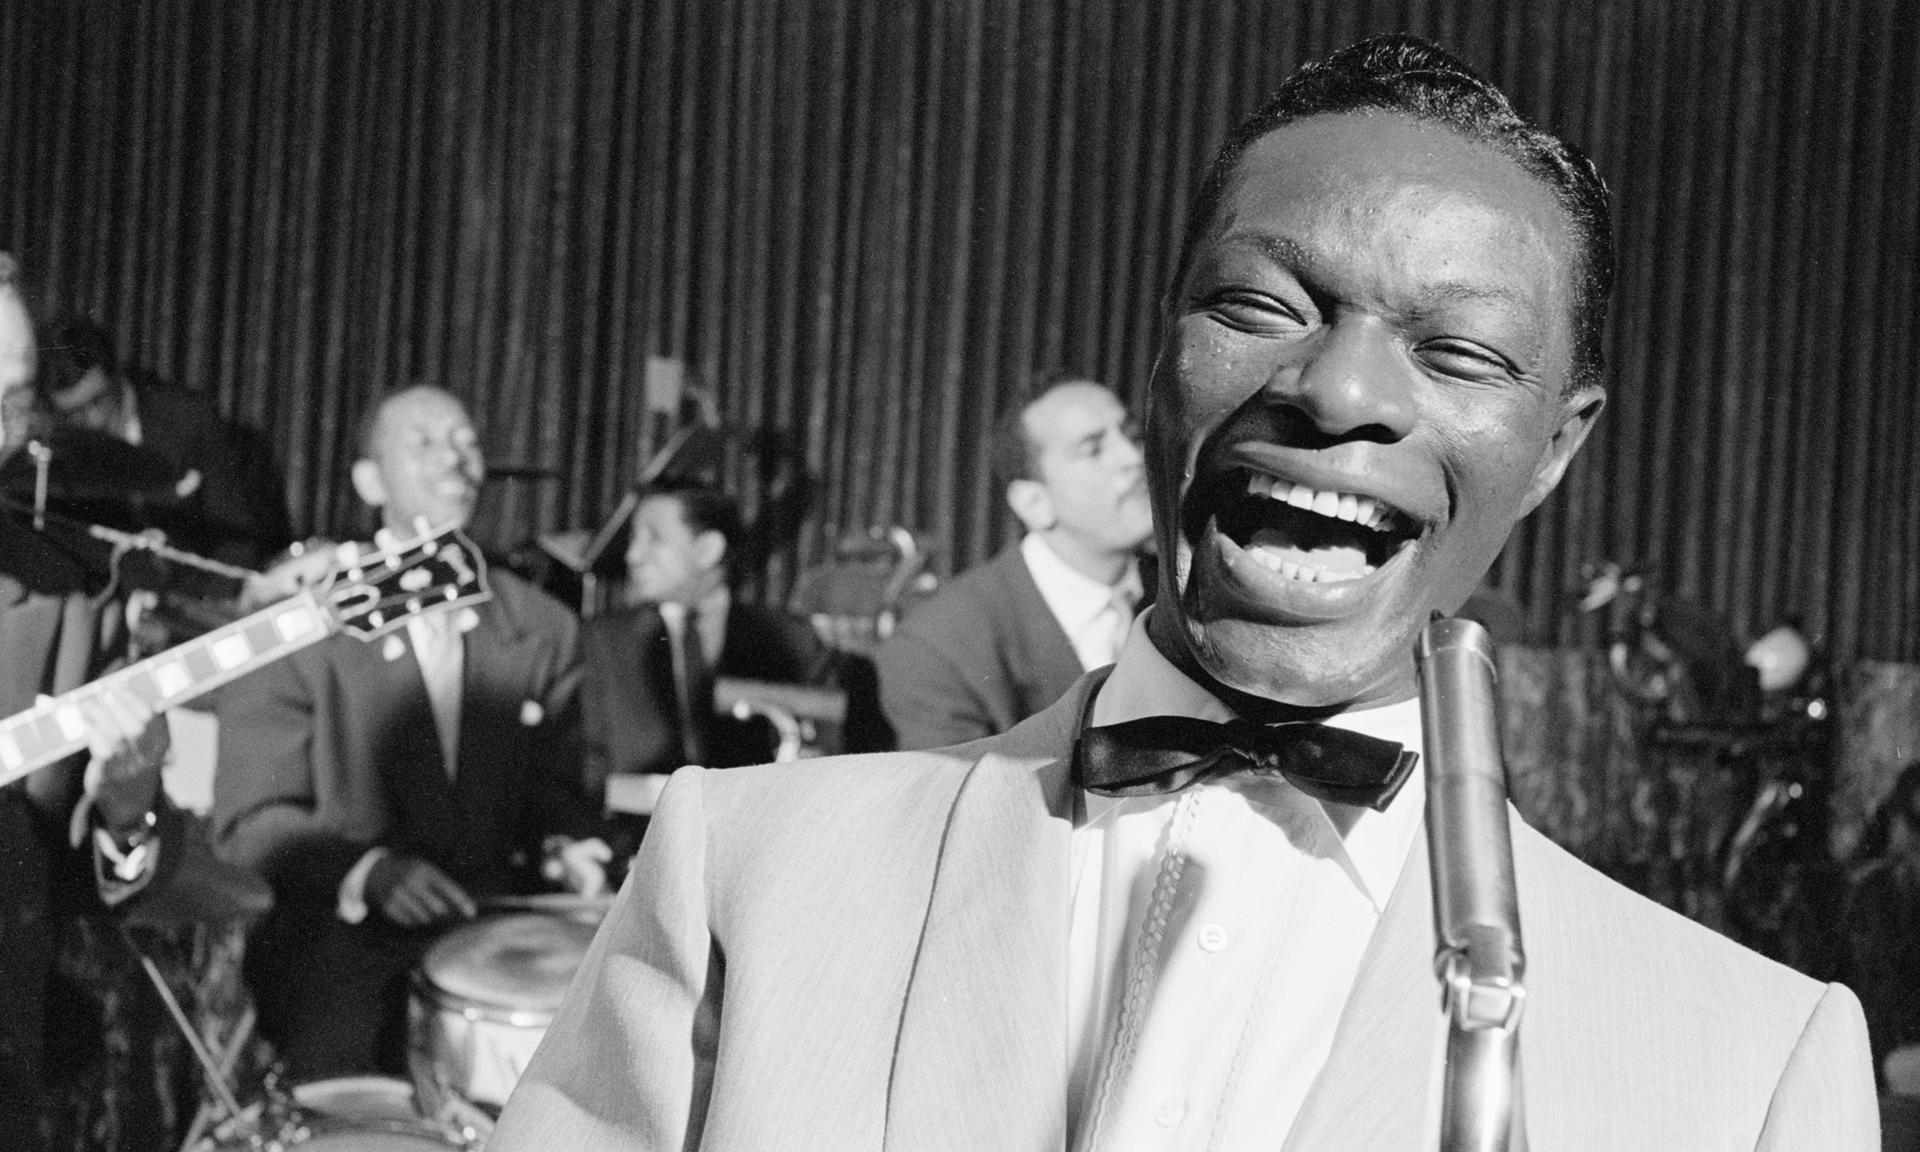 Nat King Cole performs in Chicago in 1954.